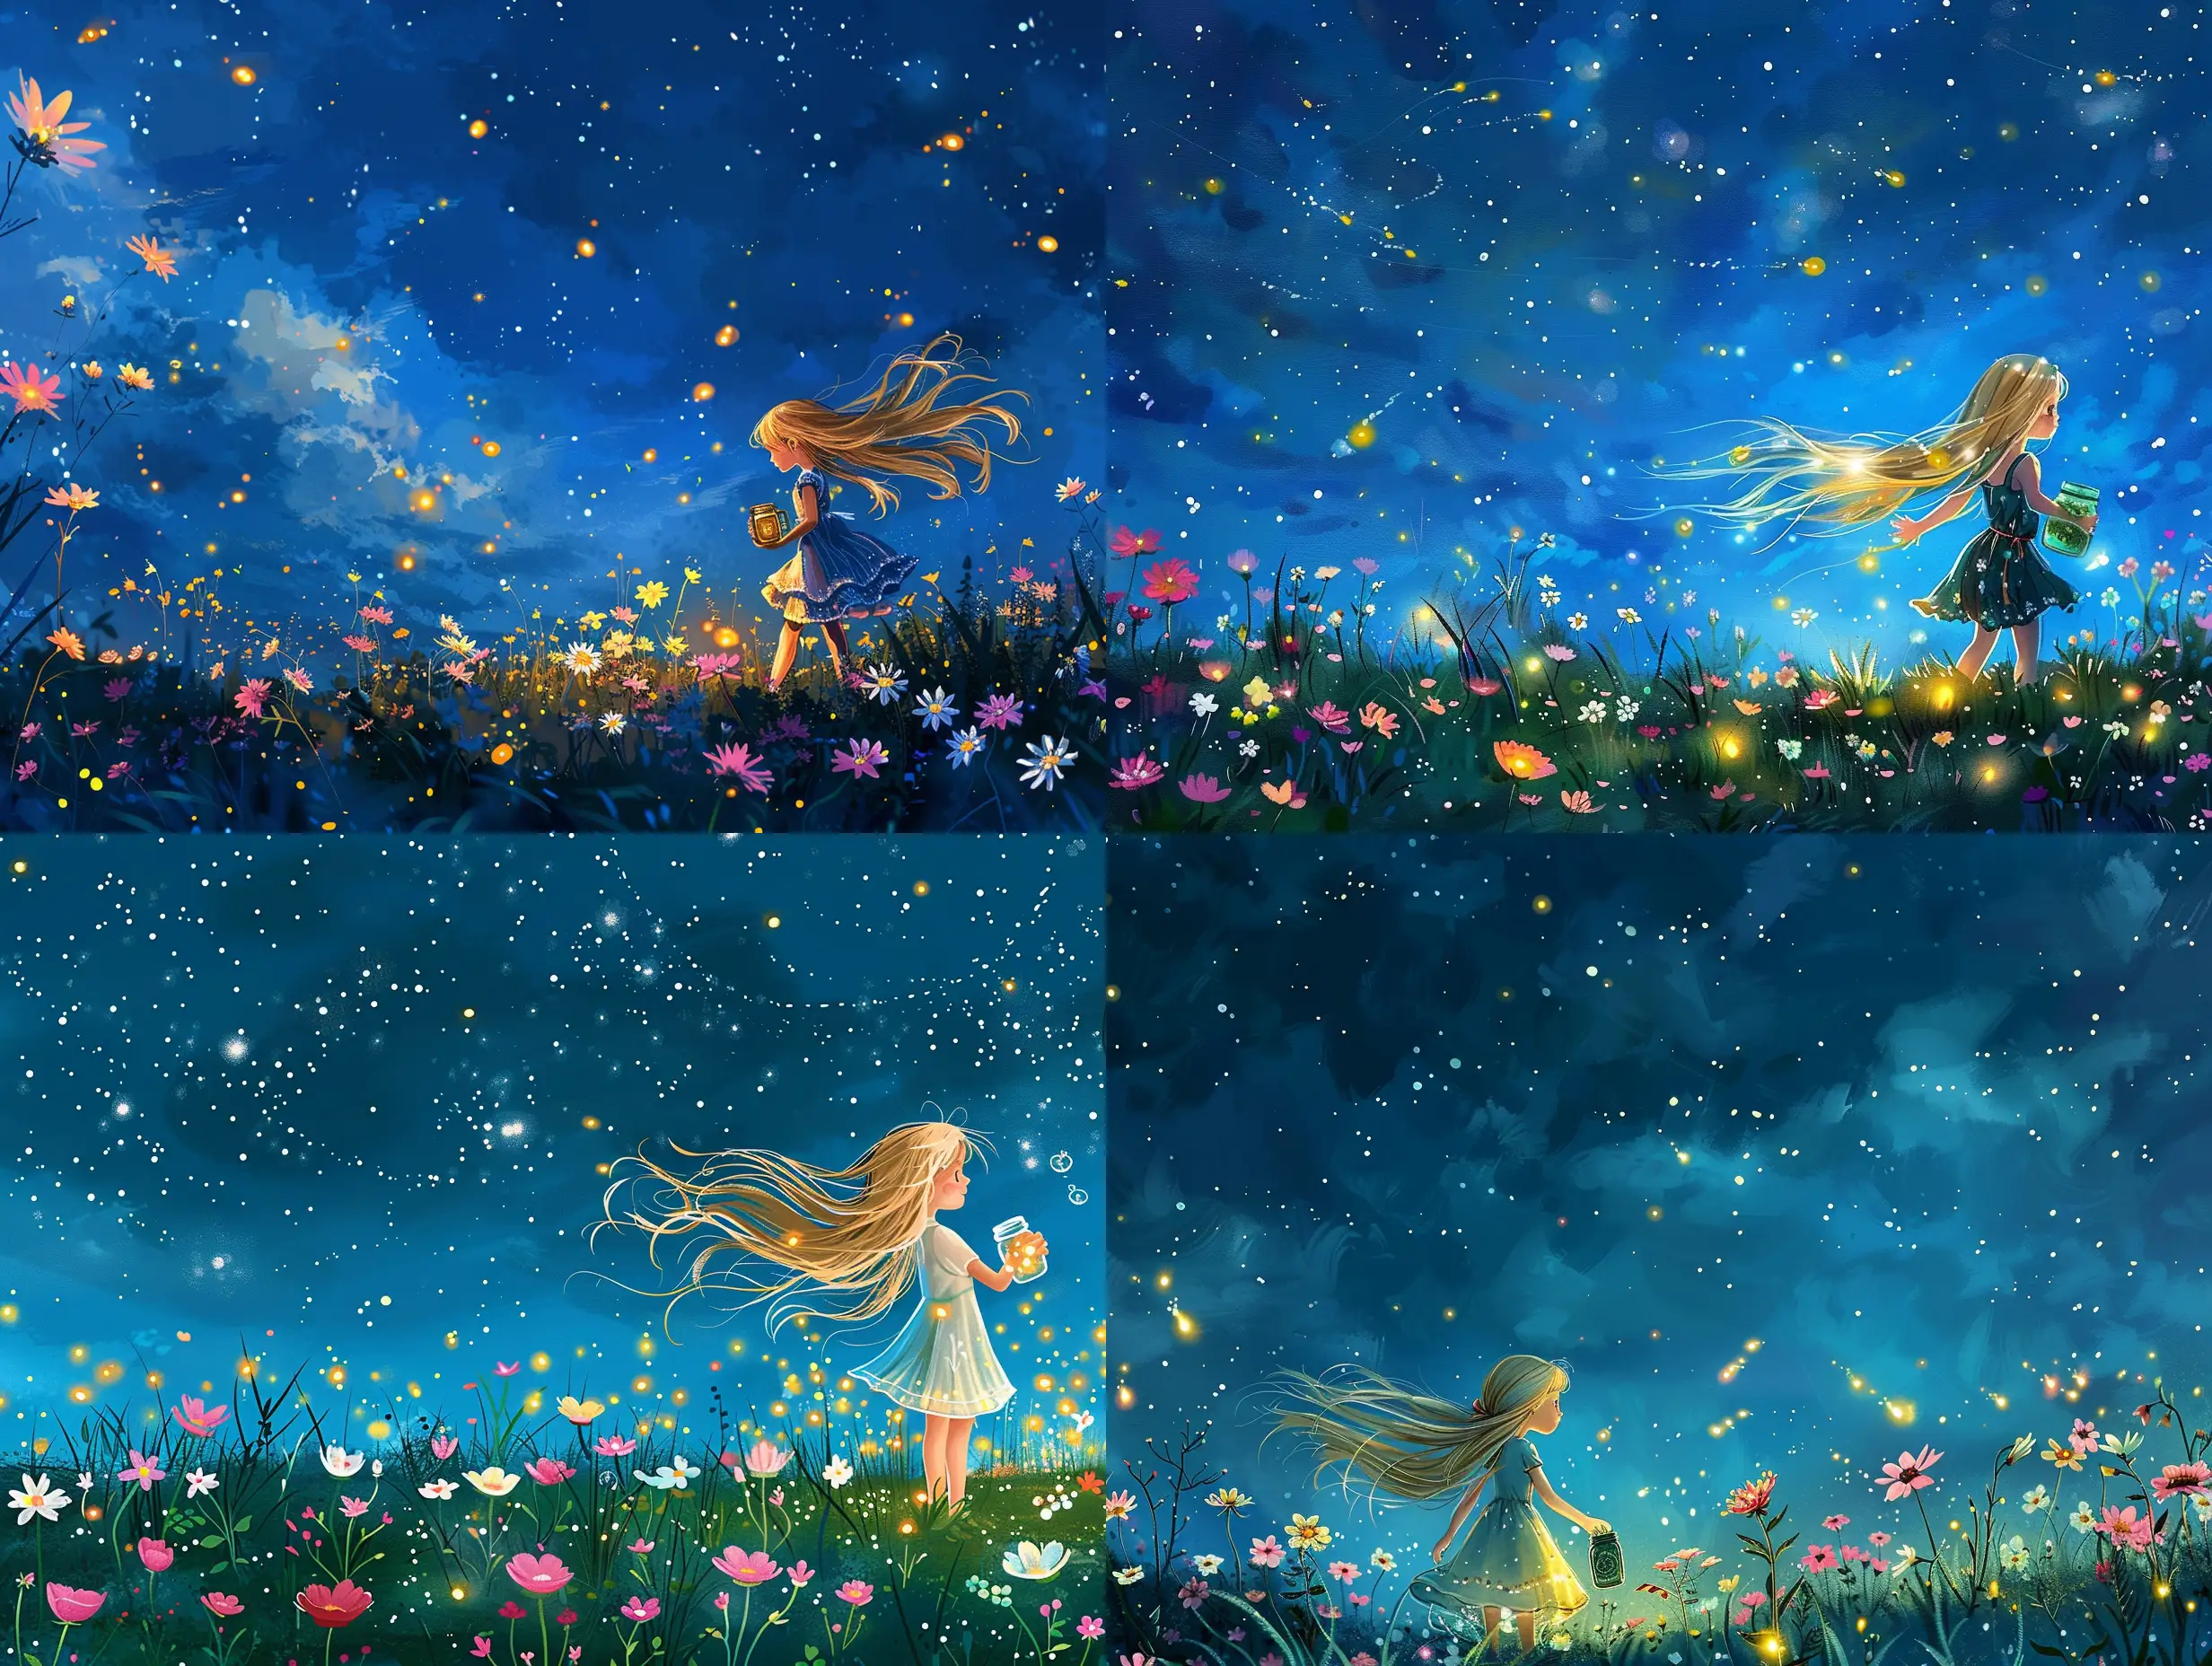 a picture dark at night with a vivid blue sky with small stars in the sky. In the meadow are small pink white and yellow flowers dancing in the night. A 8 year old girls with long blond hair blowing in the night summer breeze with a mason jar trying to caught the fireflies 
